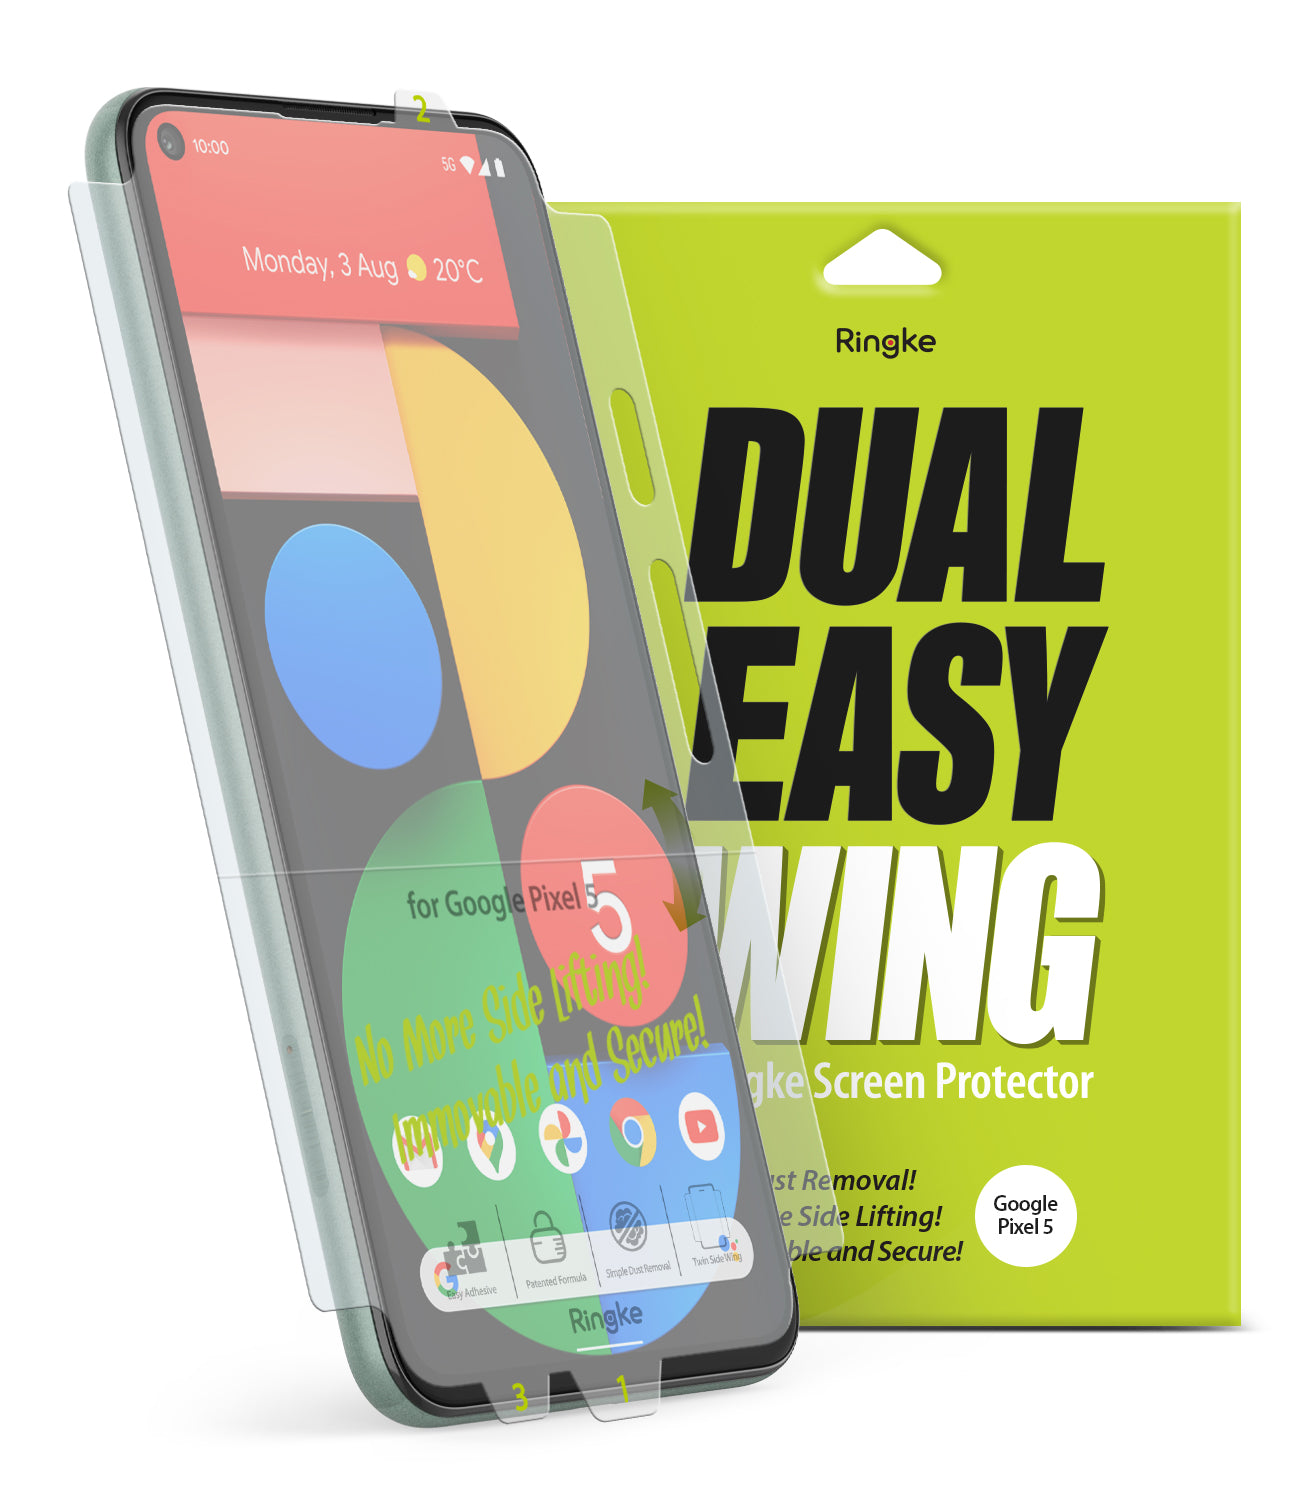 iPhone 11 Pro Screen Protector  Ringke Dual Easy Film – Ringke Official  Store